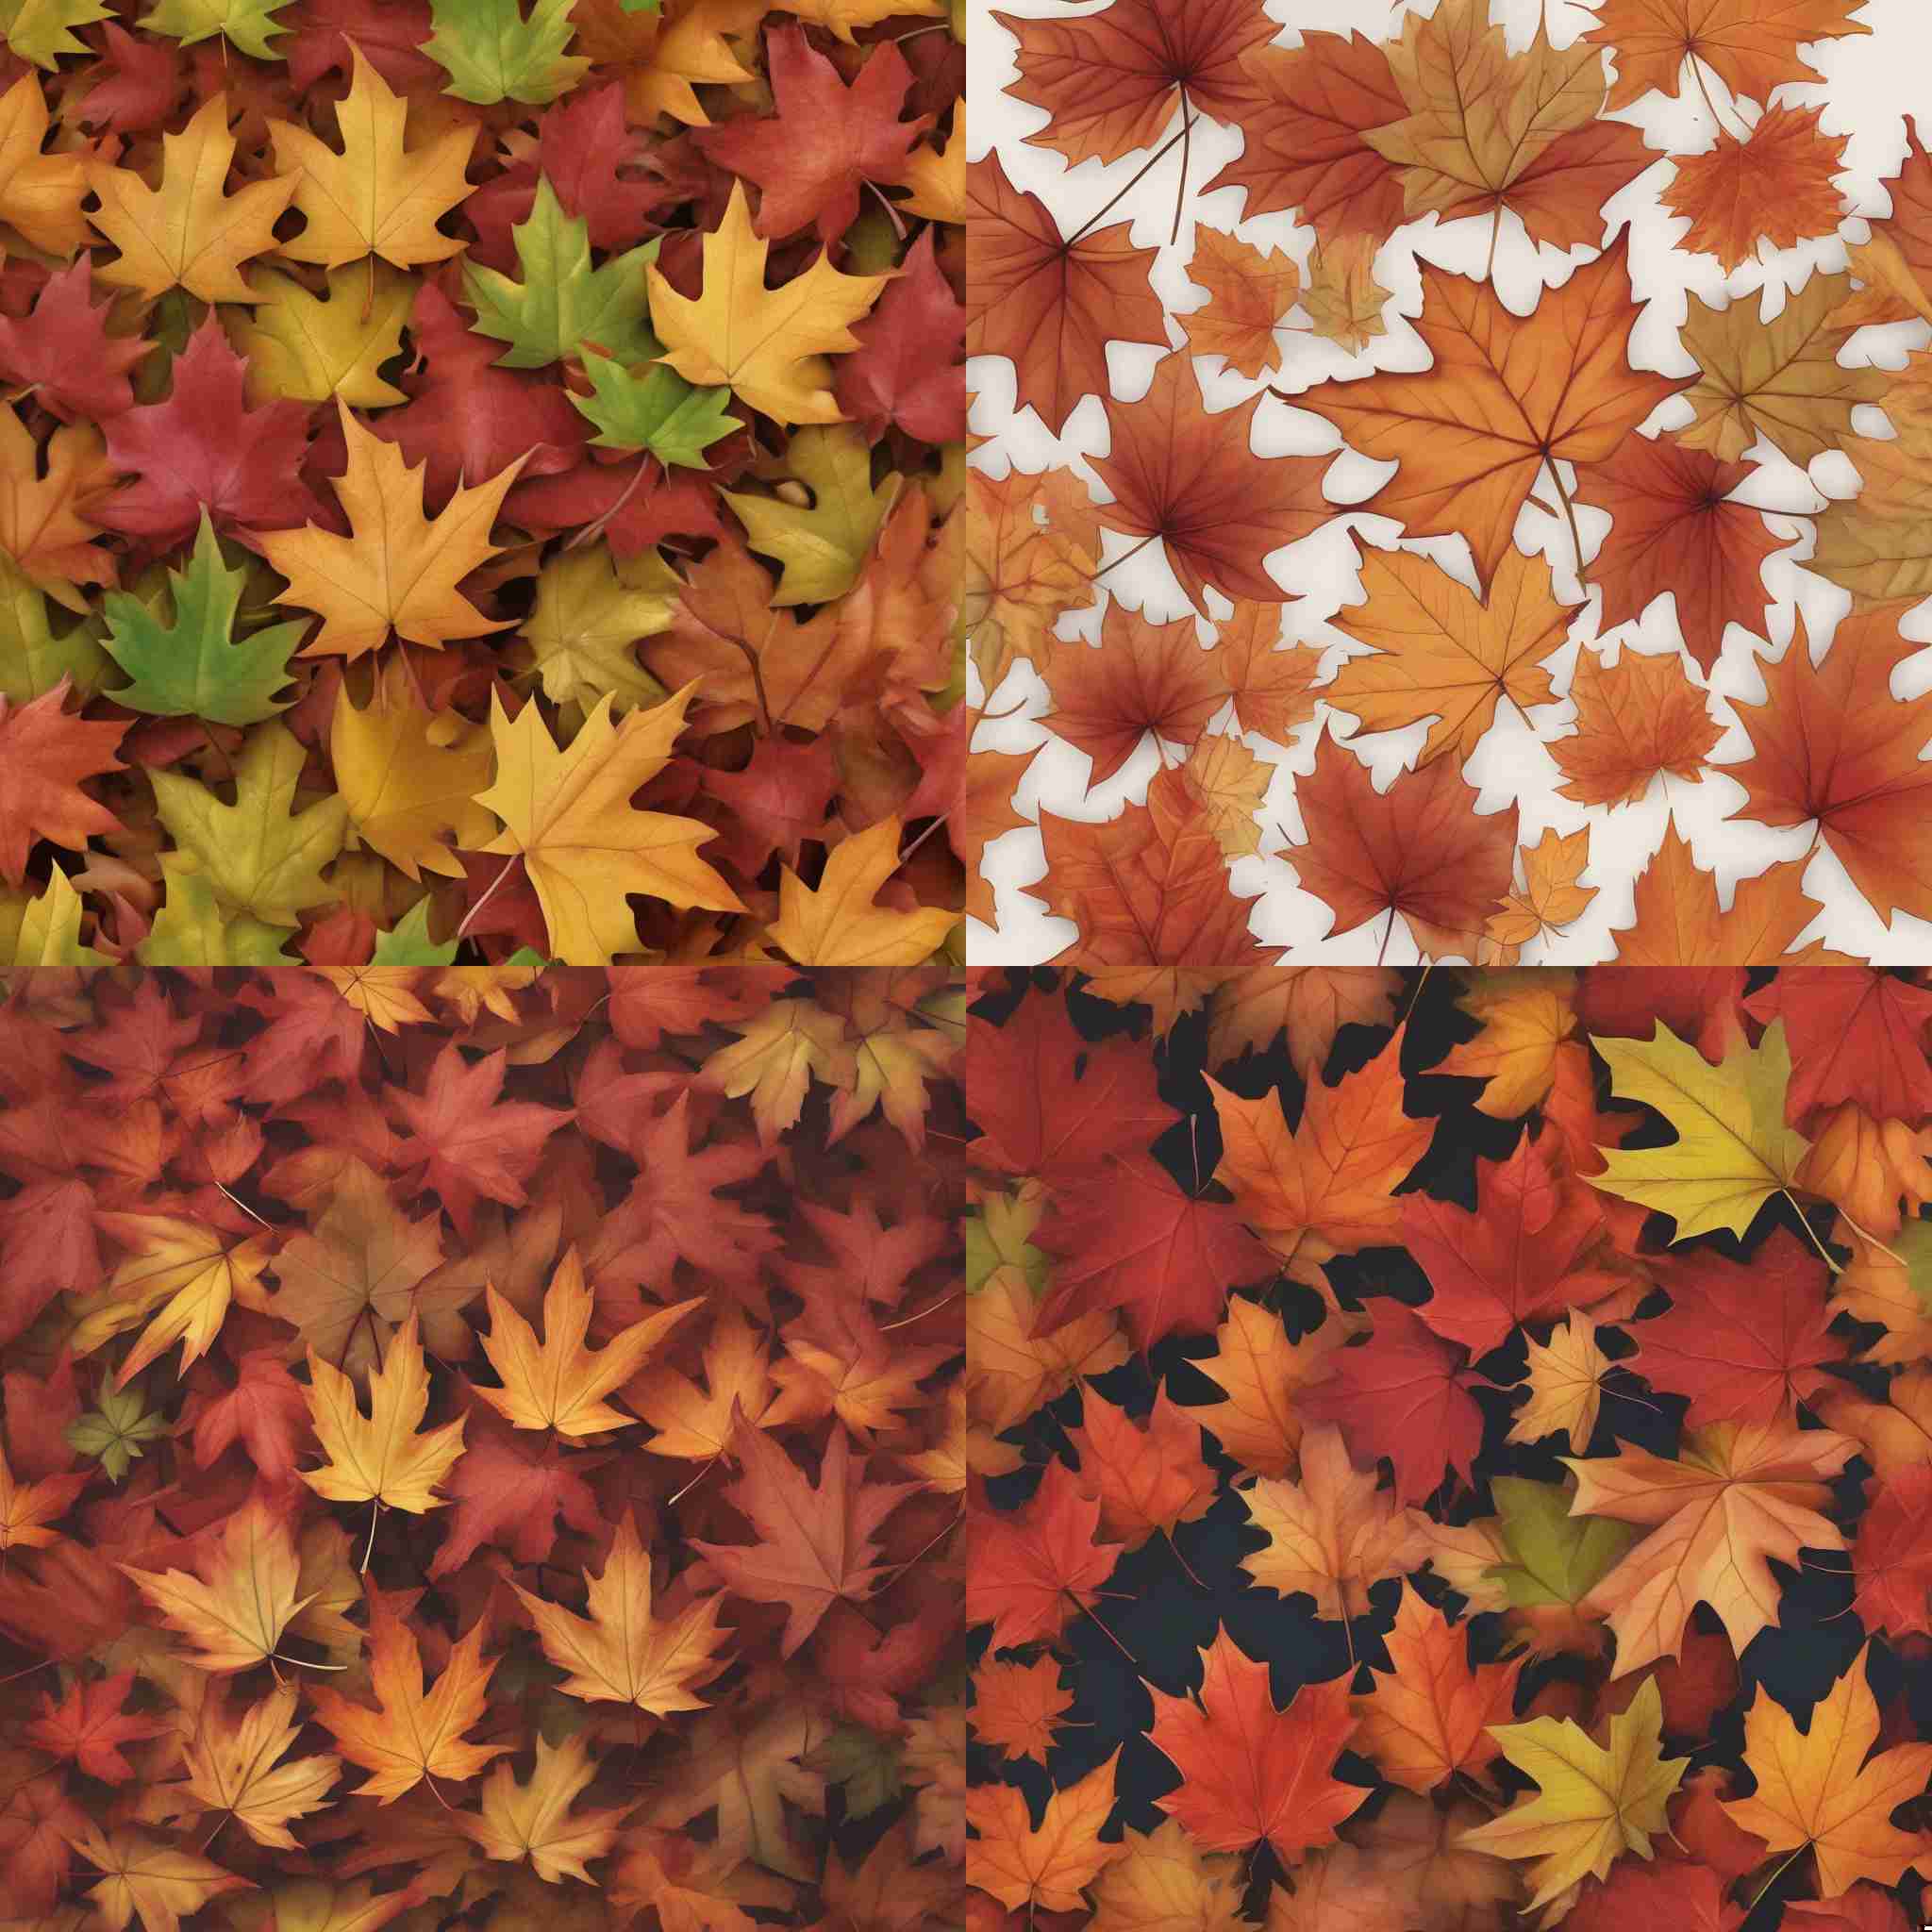 Maple leaves during autumn